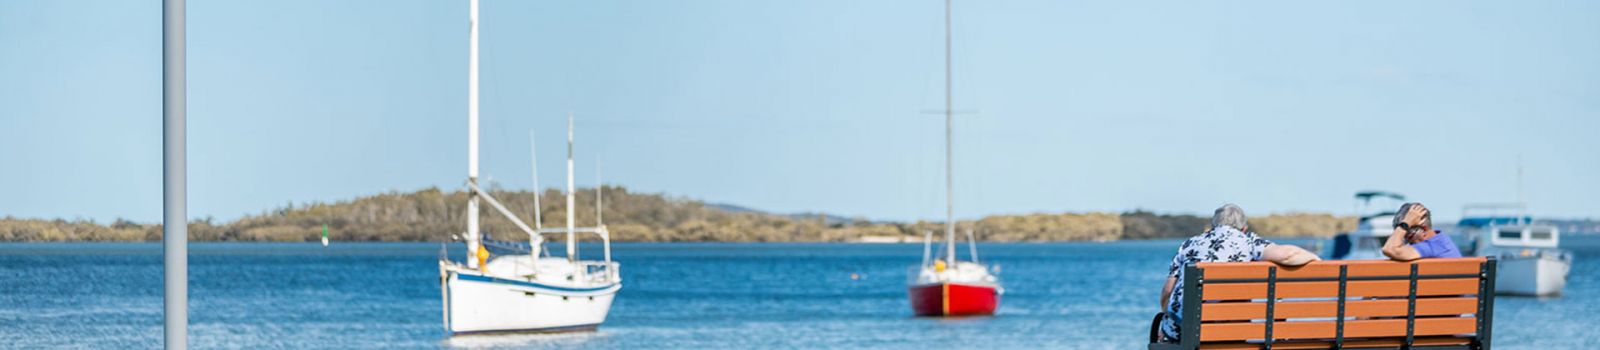 Image of 2 people sitting on a bench over looking a bay with yachts sailing past banner image